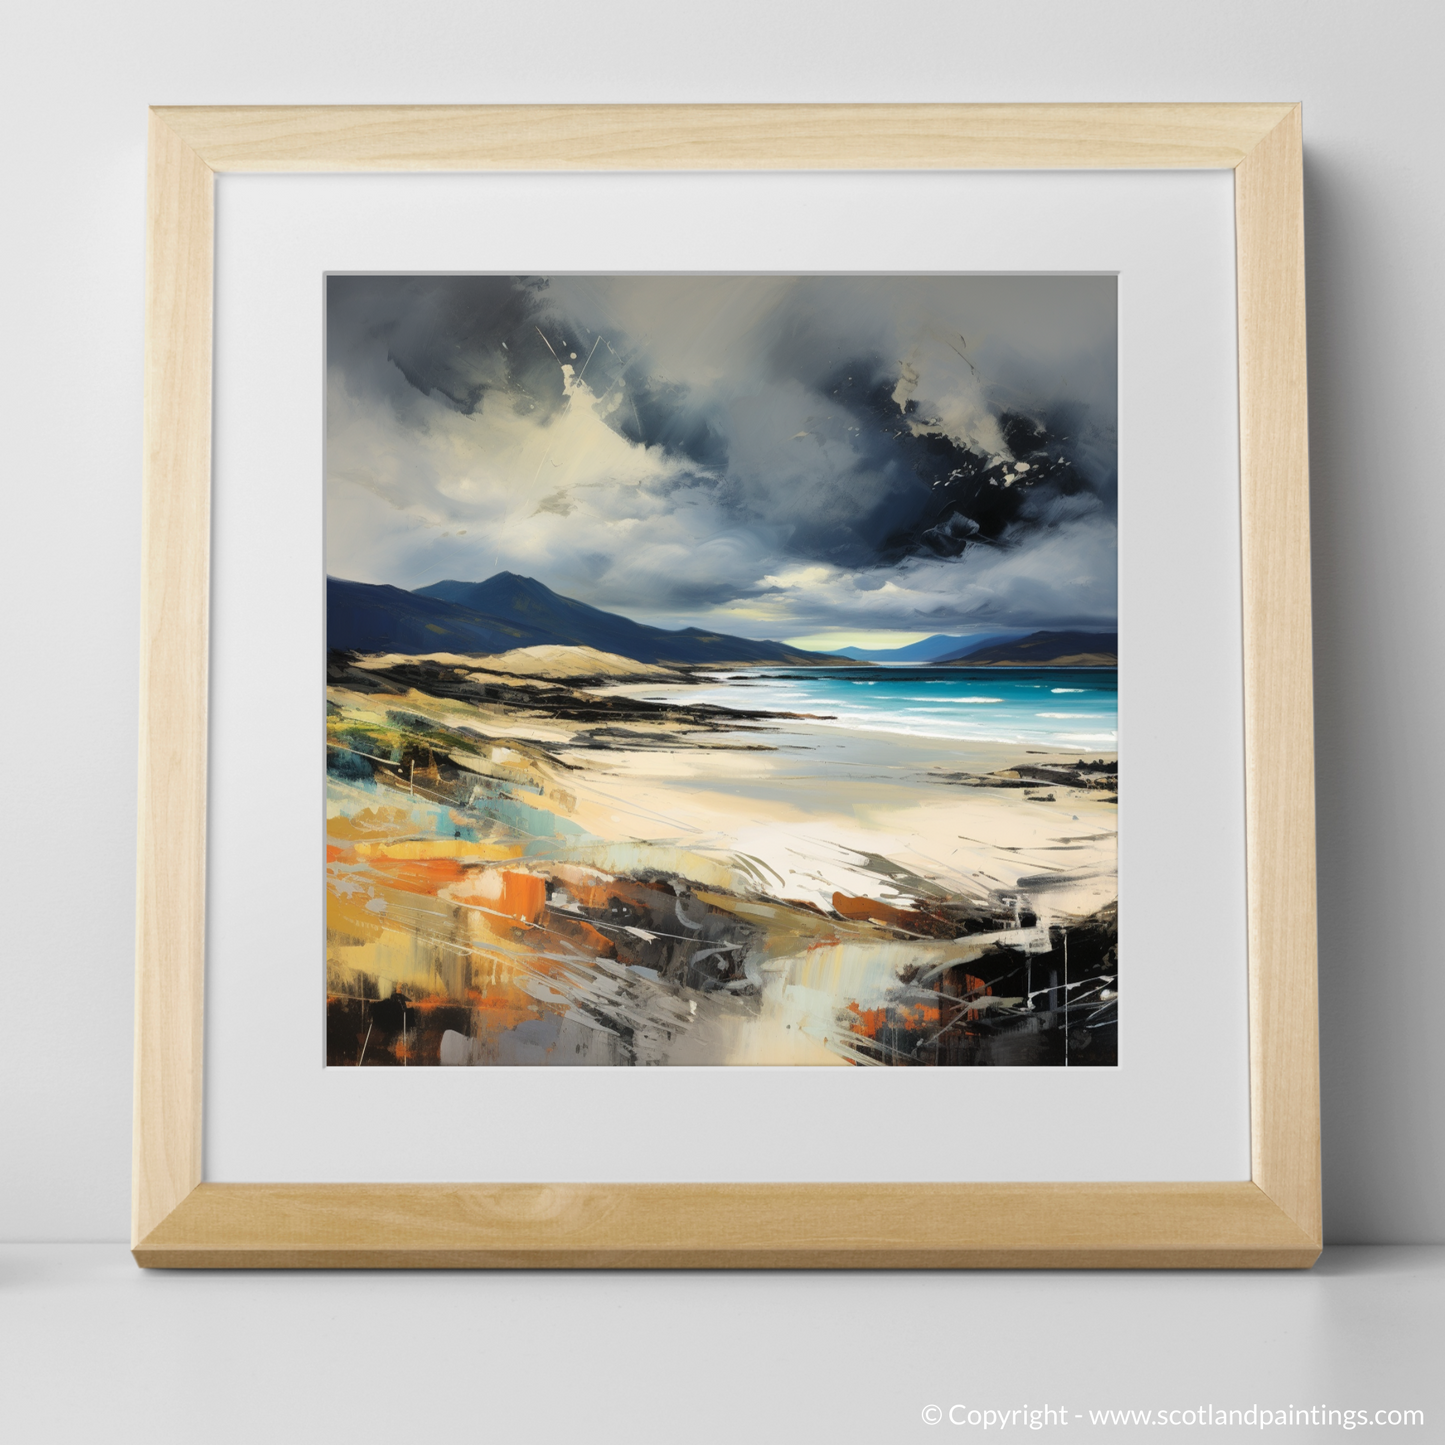 Storm's Embrace at Traigh Mhor